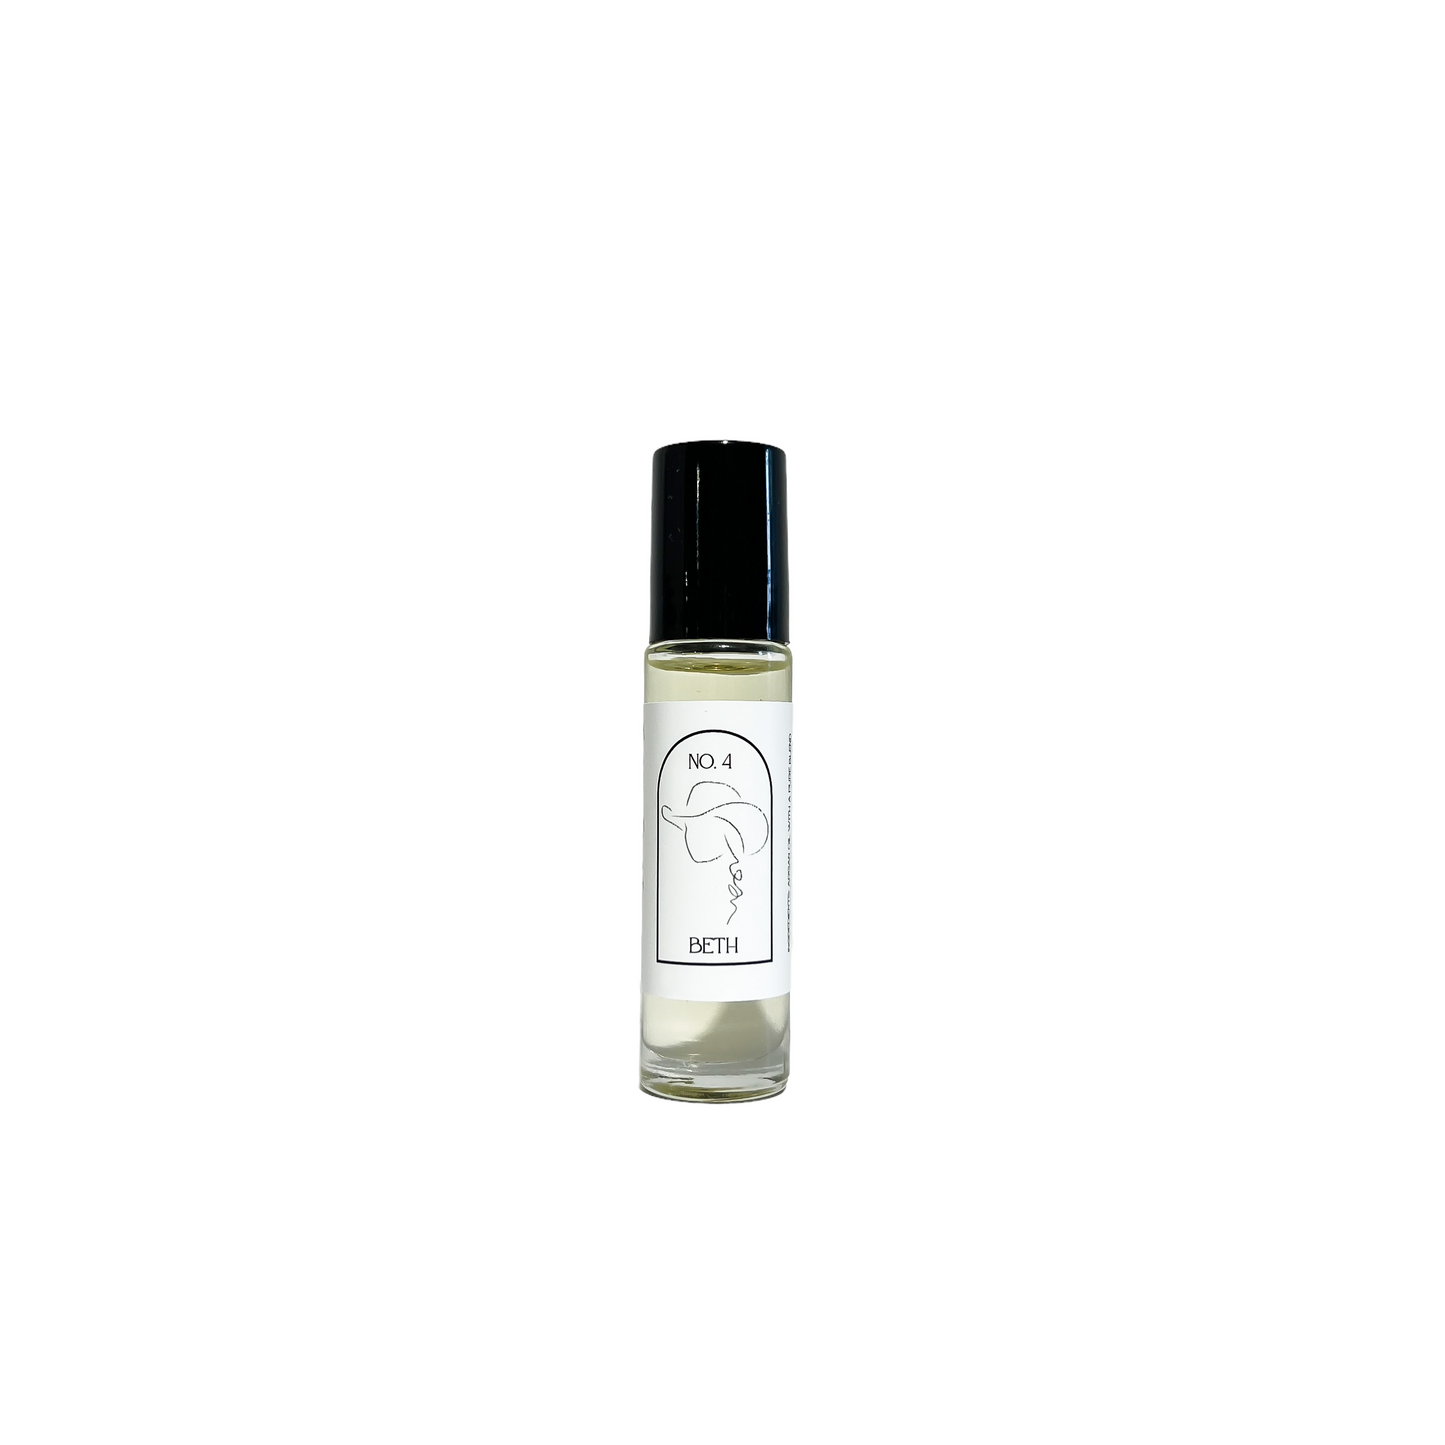 Clear, ten milliliter, cherry, cedar wood, and amber scented roll-on applicator with a white label that read Beth